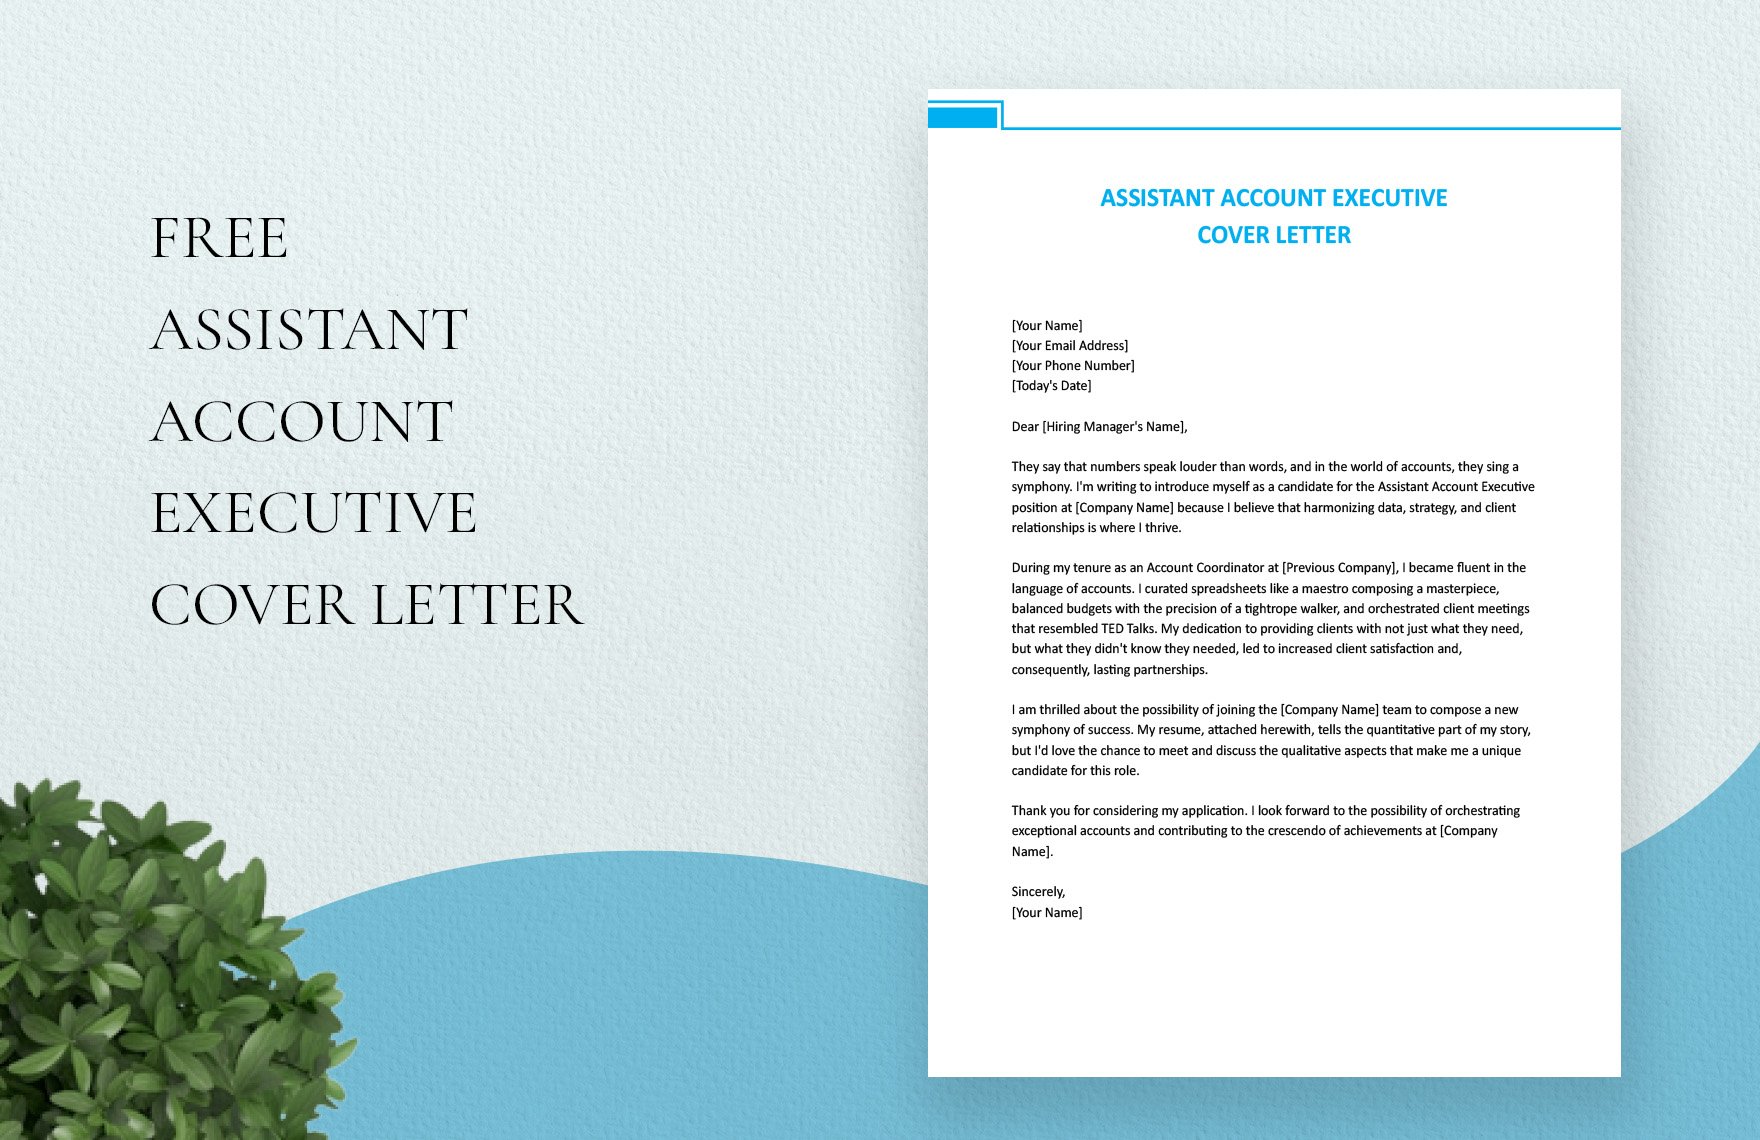 Assistant Account Executive Cover Letter